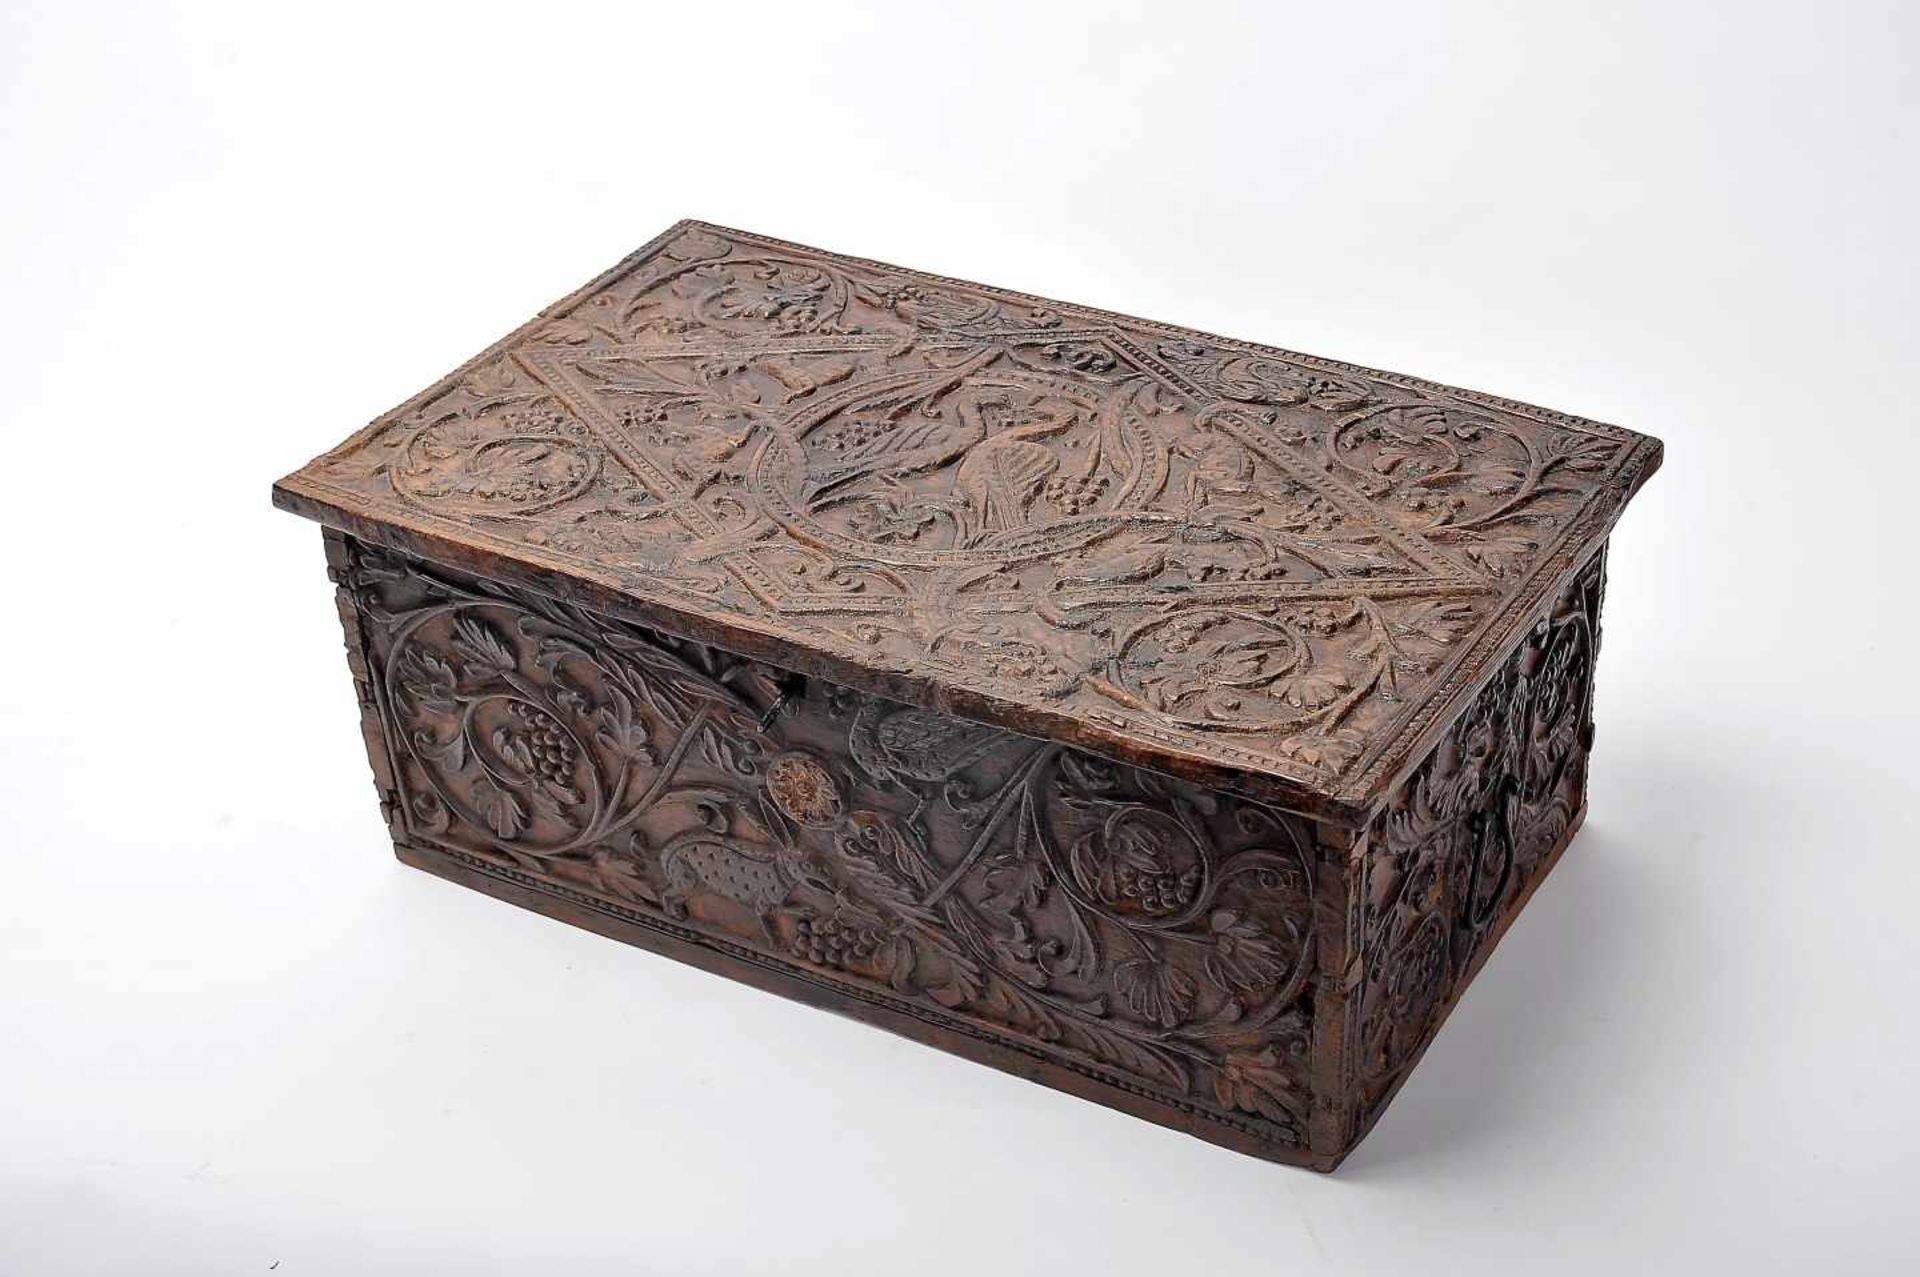 A Small ChestA Small Chest, red anjili wood with traces of polychromy, low-relief decoration "